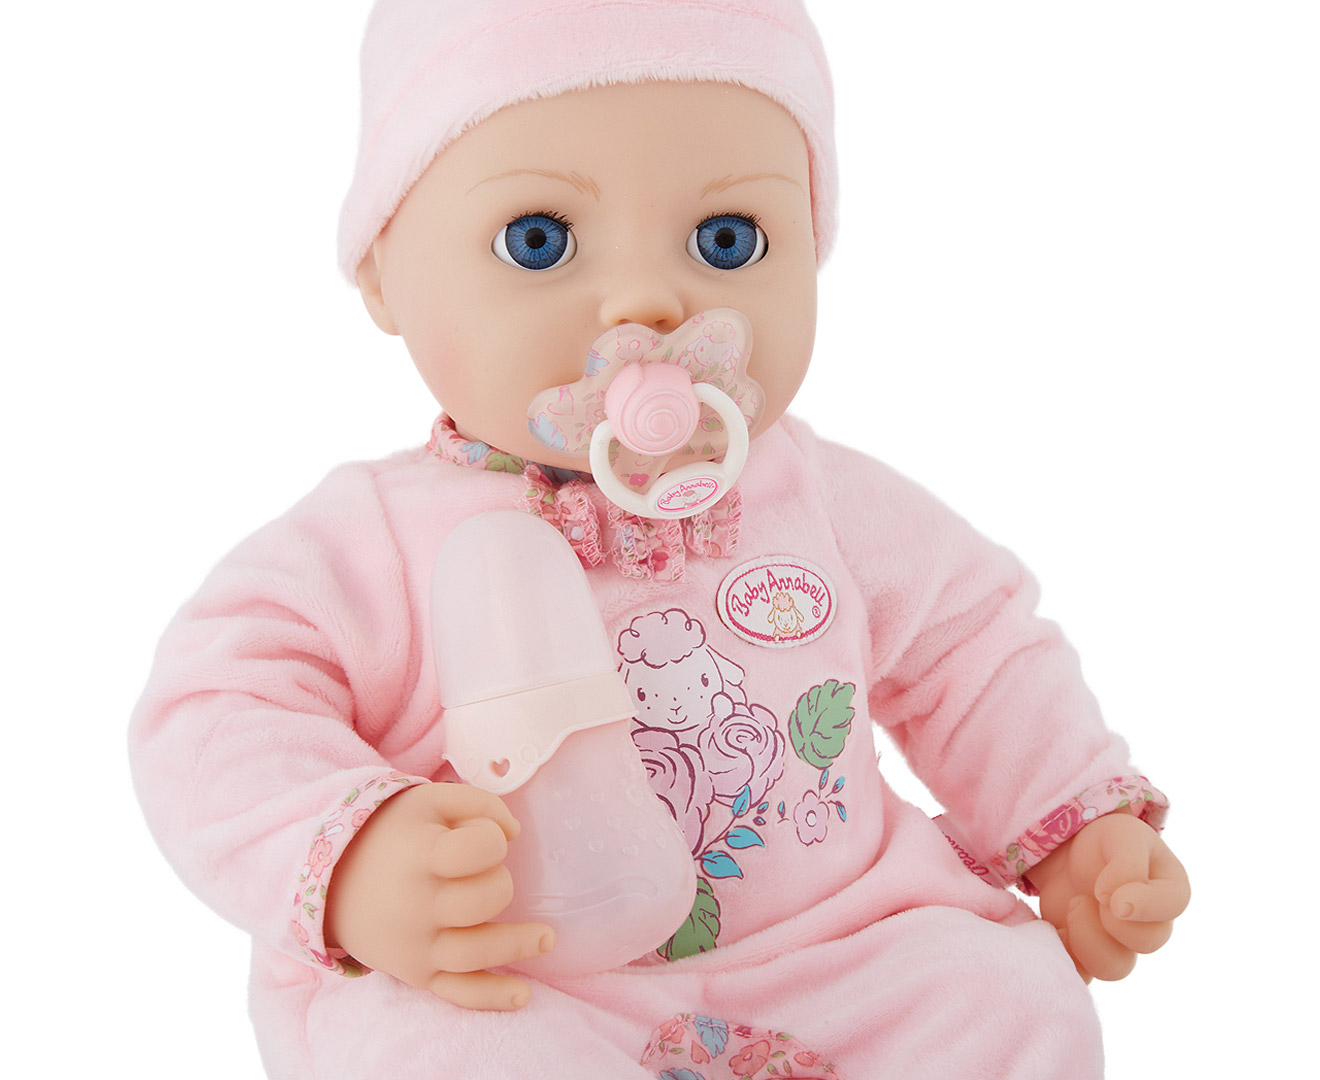 Baby annabell doll